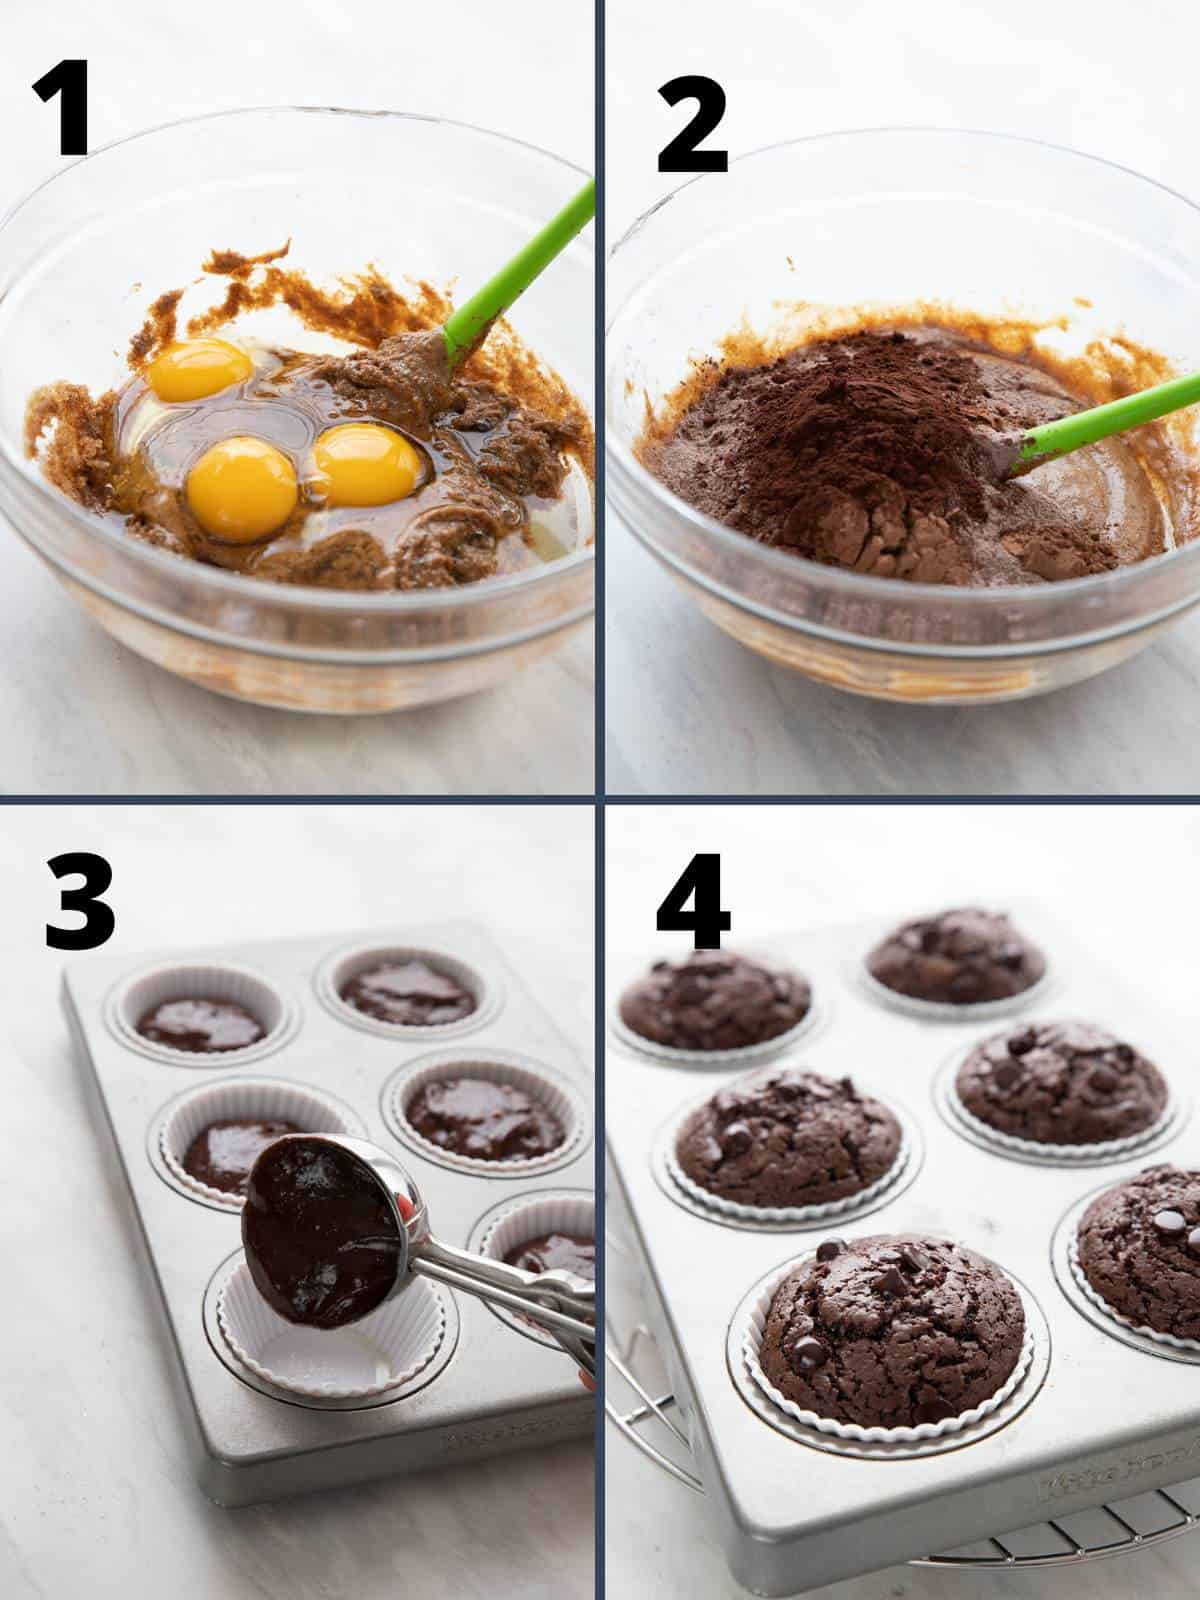 A collage of 4 images showing how to make Chocolate Protein Muffins.